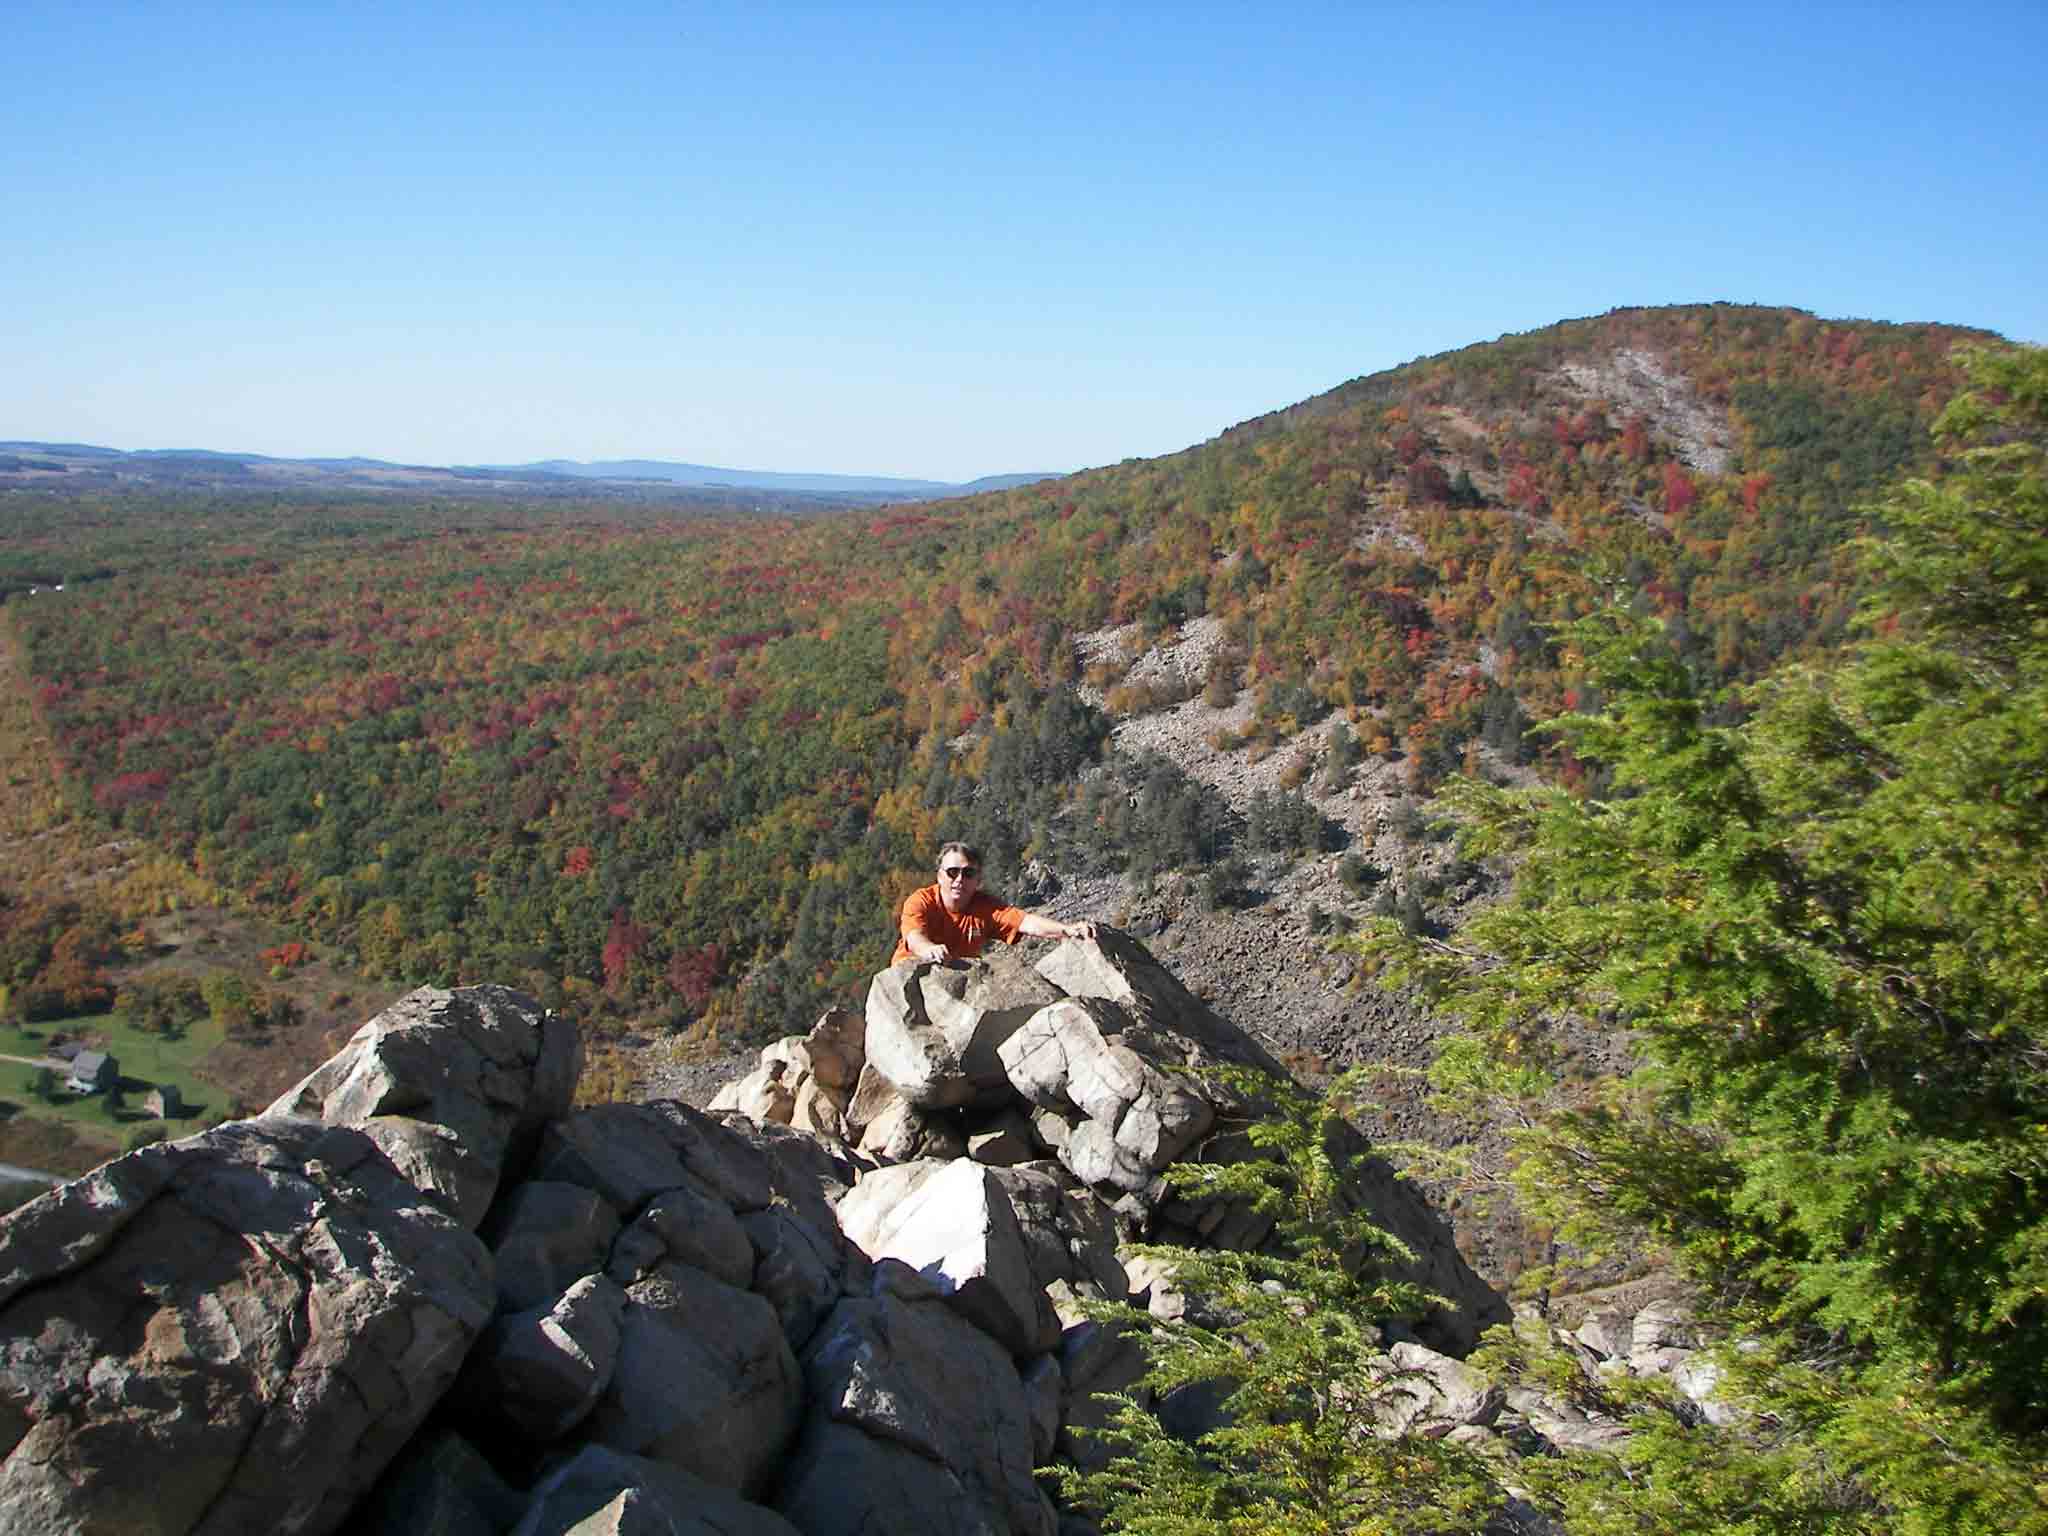 mm 19.5 Getting to the top of the rocks above the Lehigh River. 
Courtesy jadams444@aol.com